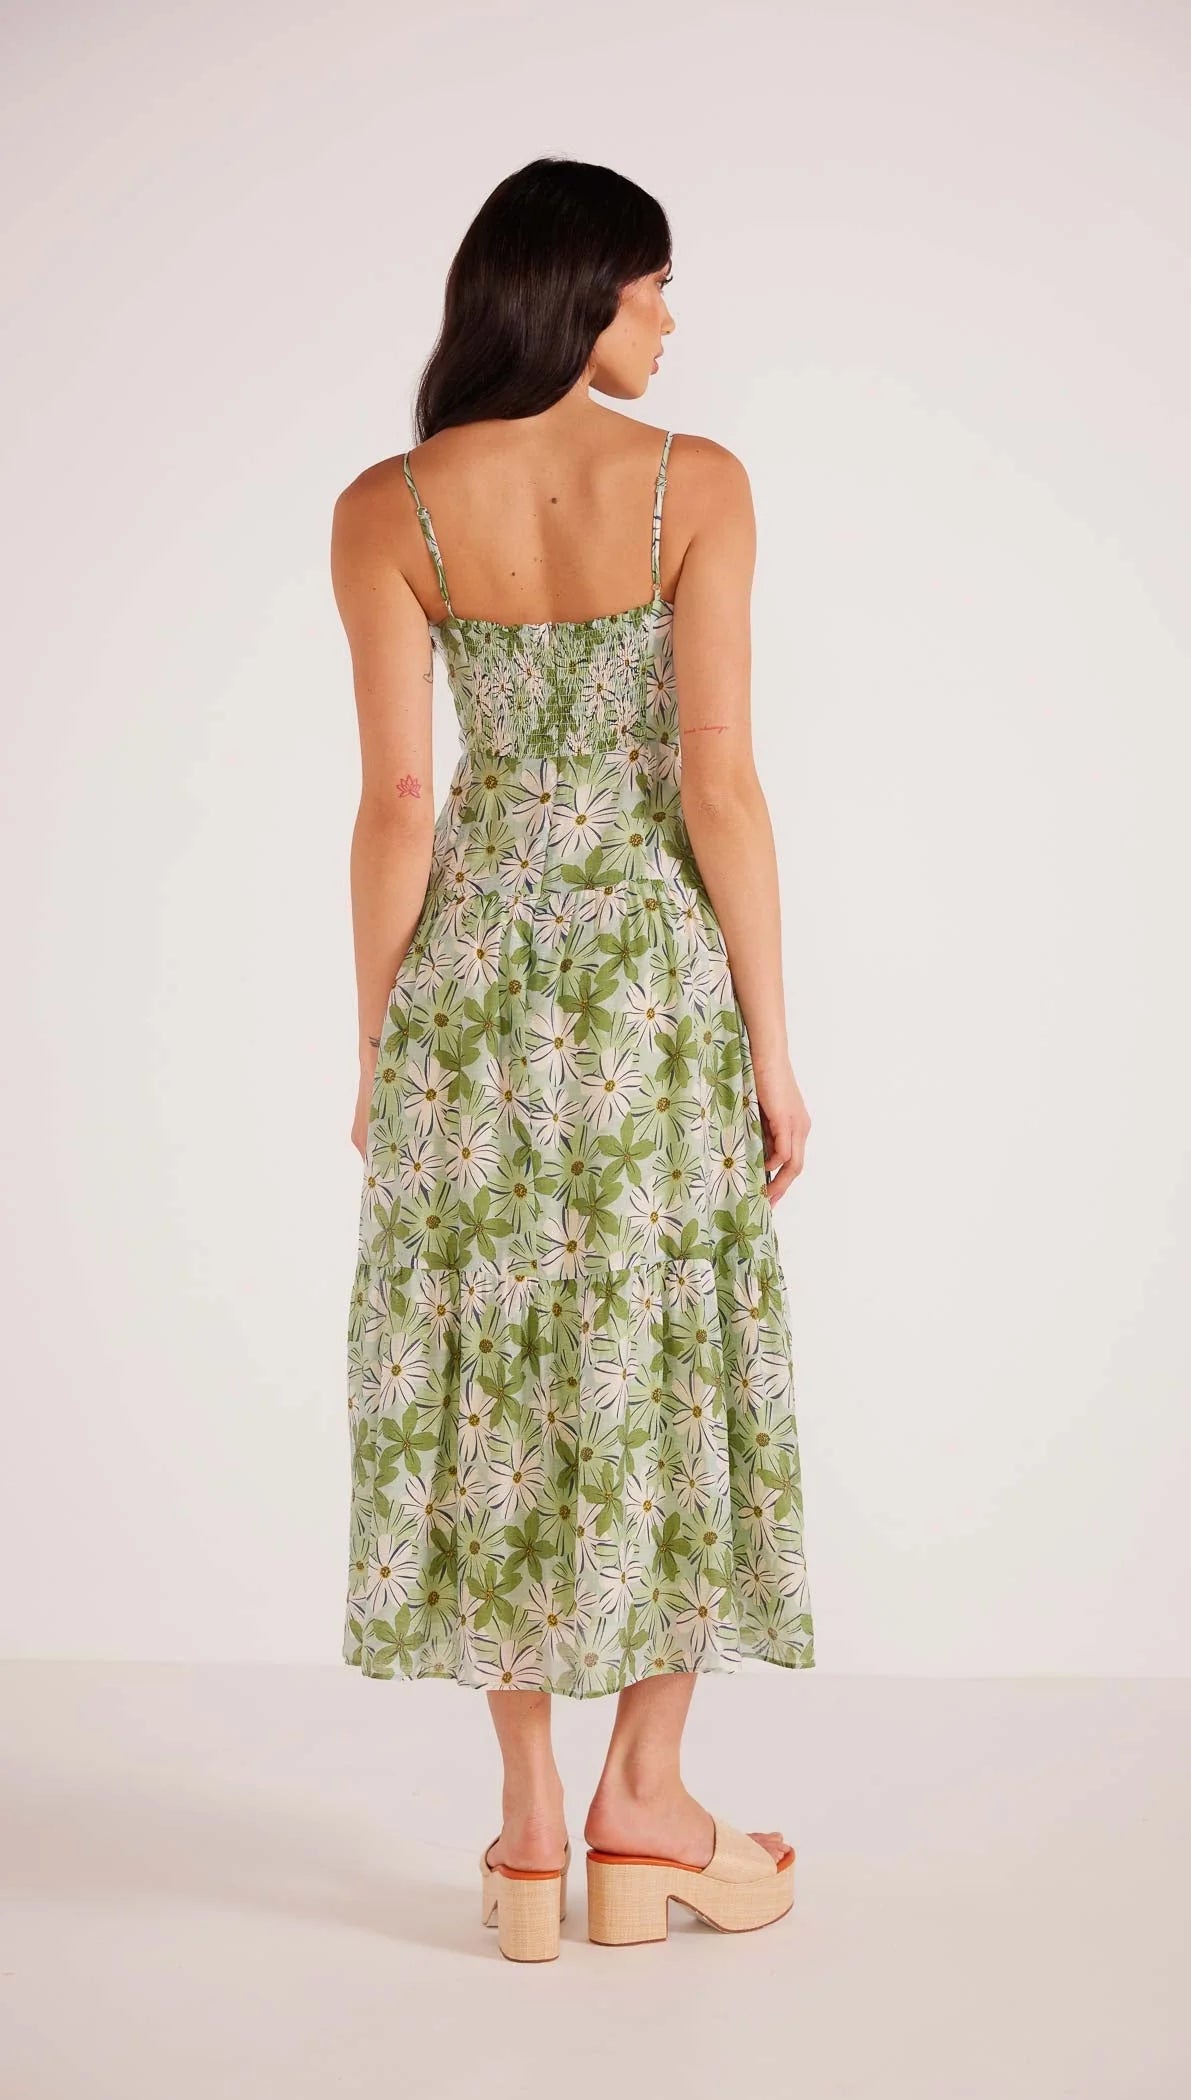 Back view of woman wearing a green and white floral print maxi dress with spaghetti straps and a fit and flare silhouette